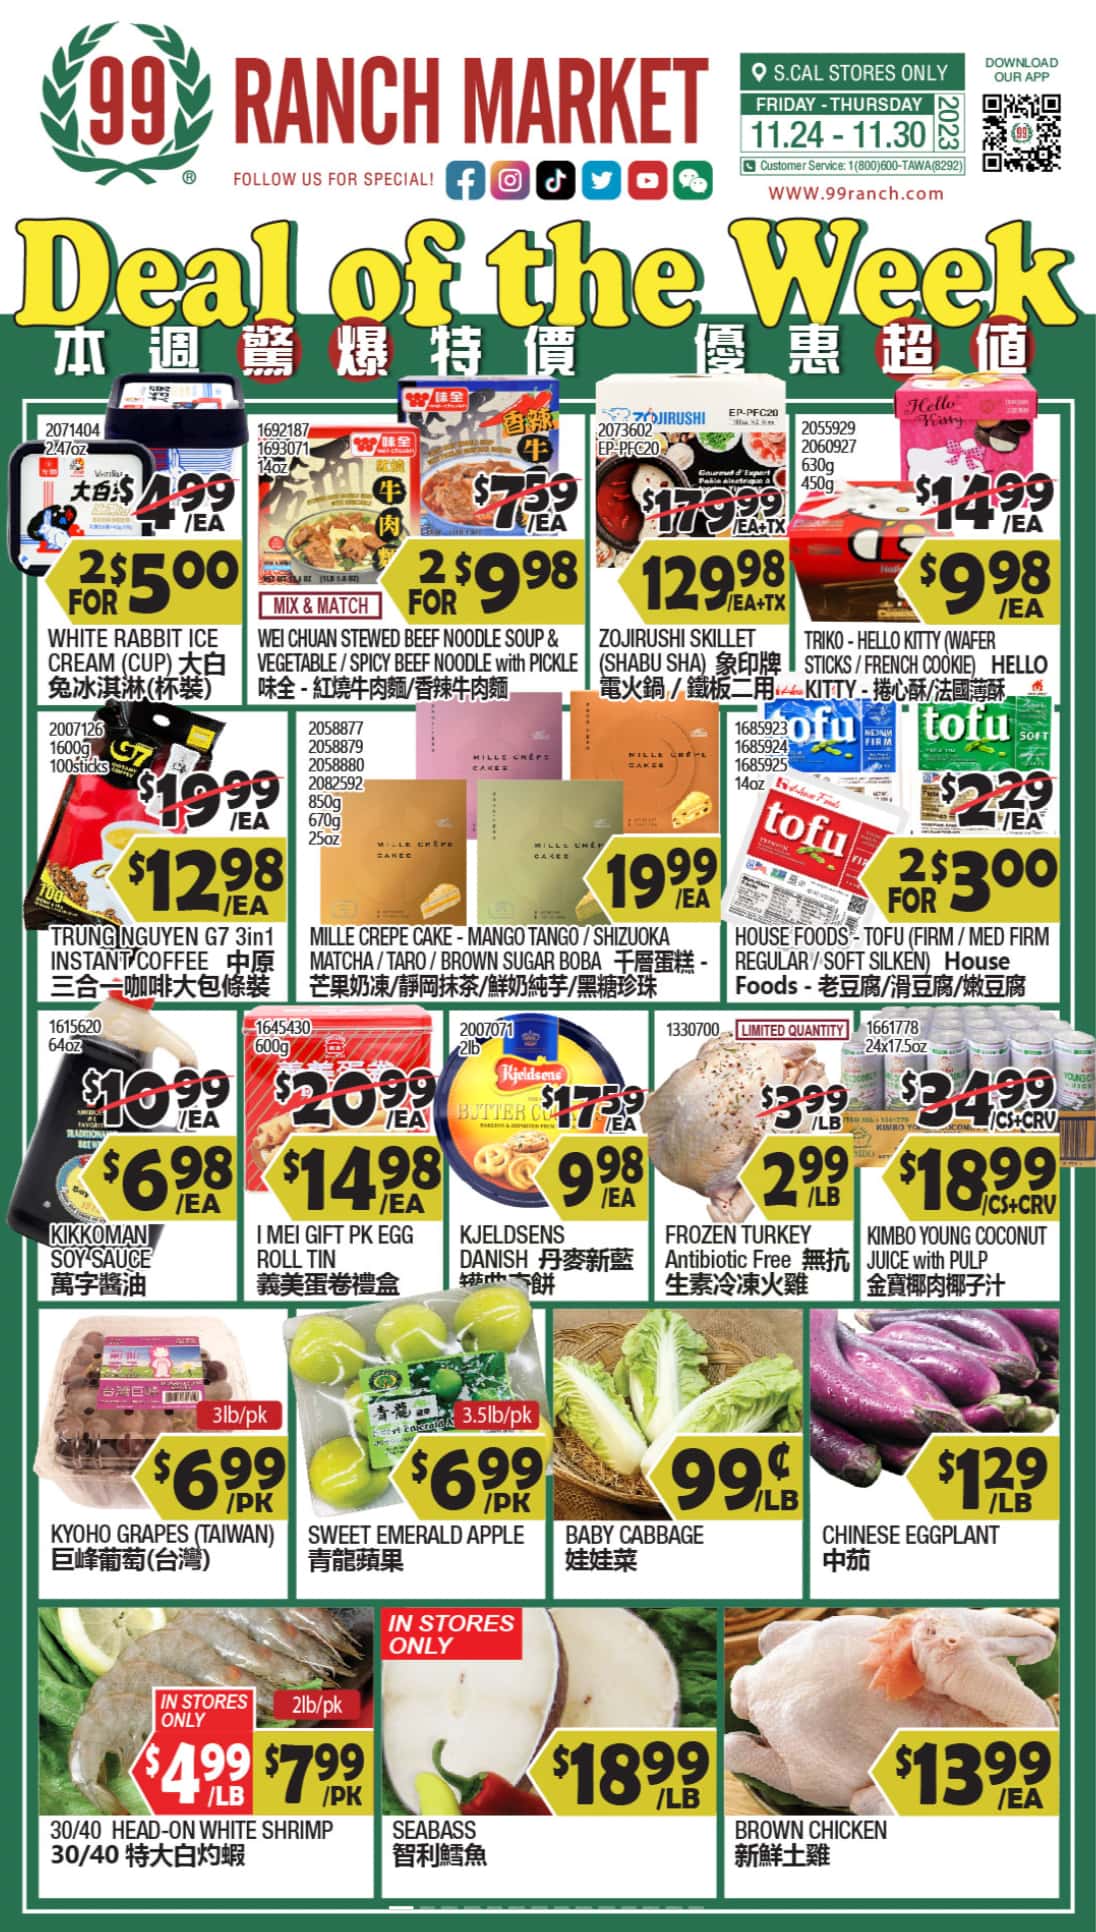 99 Ranch Market Weekly Ad December 15 to December 21, 2023 1 – 99 ranch ad 1 2